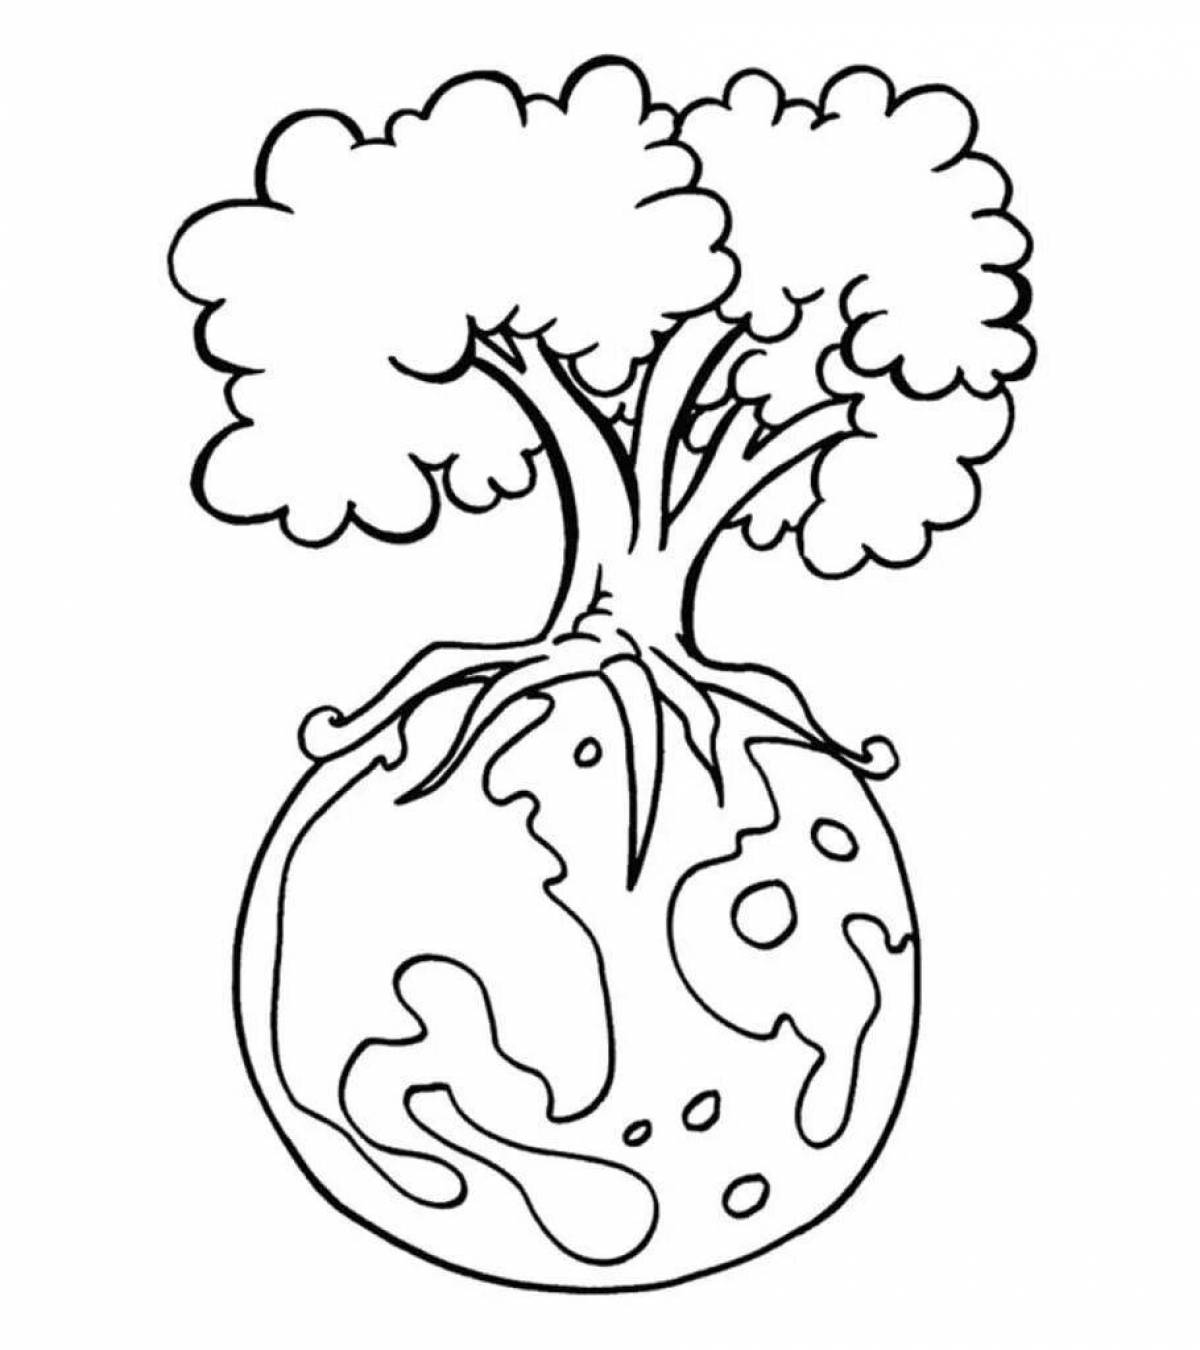 Fun care for nature coloring page